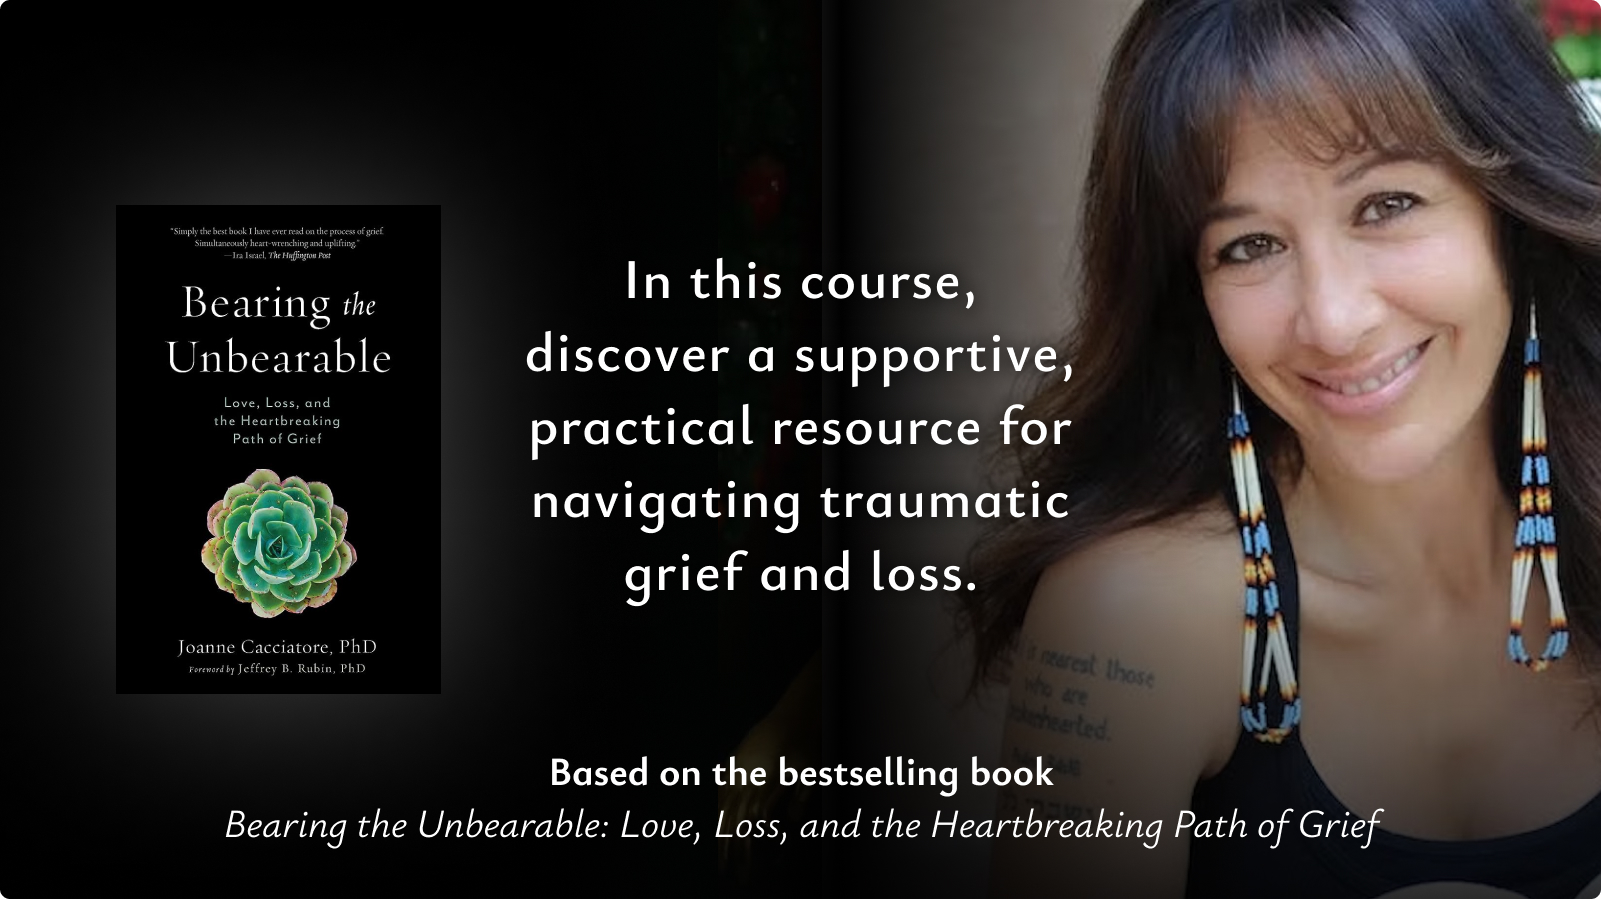 Joanne Cacciatore bearing the unbearable online course. Based on the bestselling book.